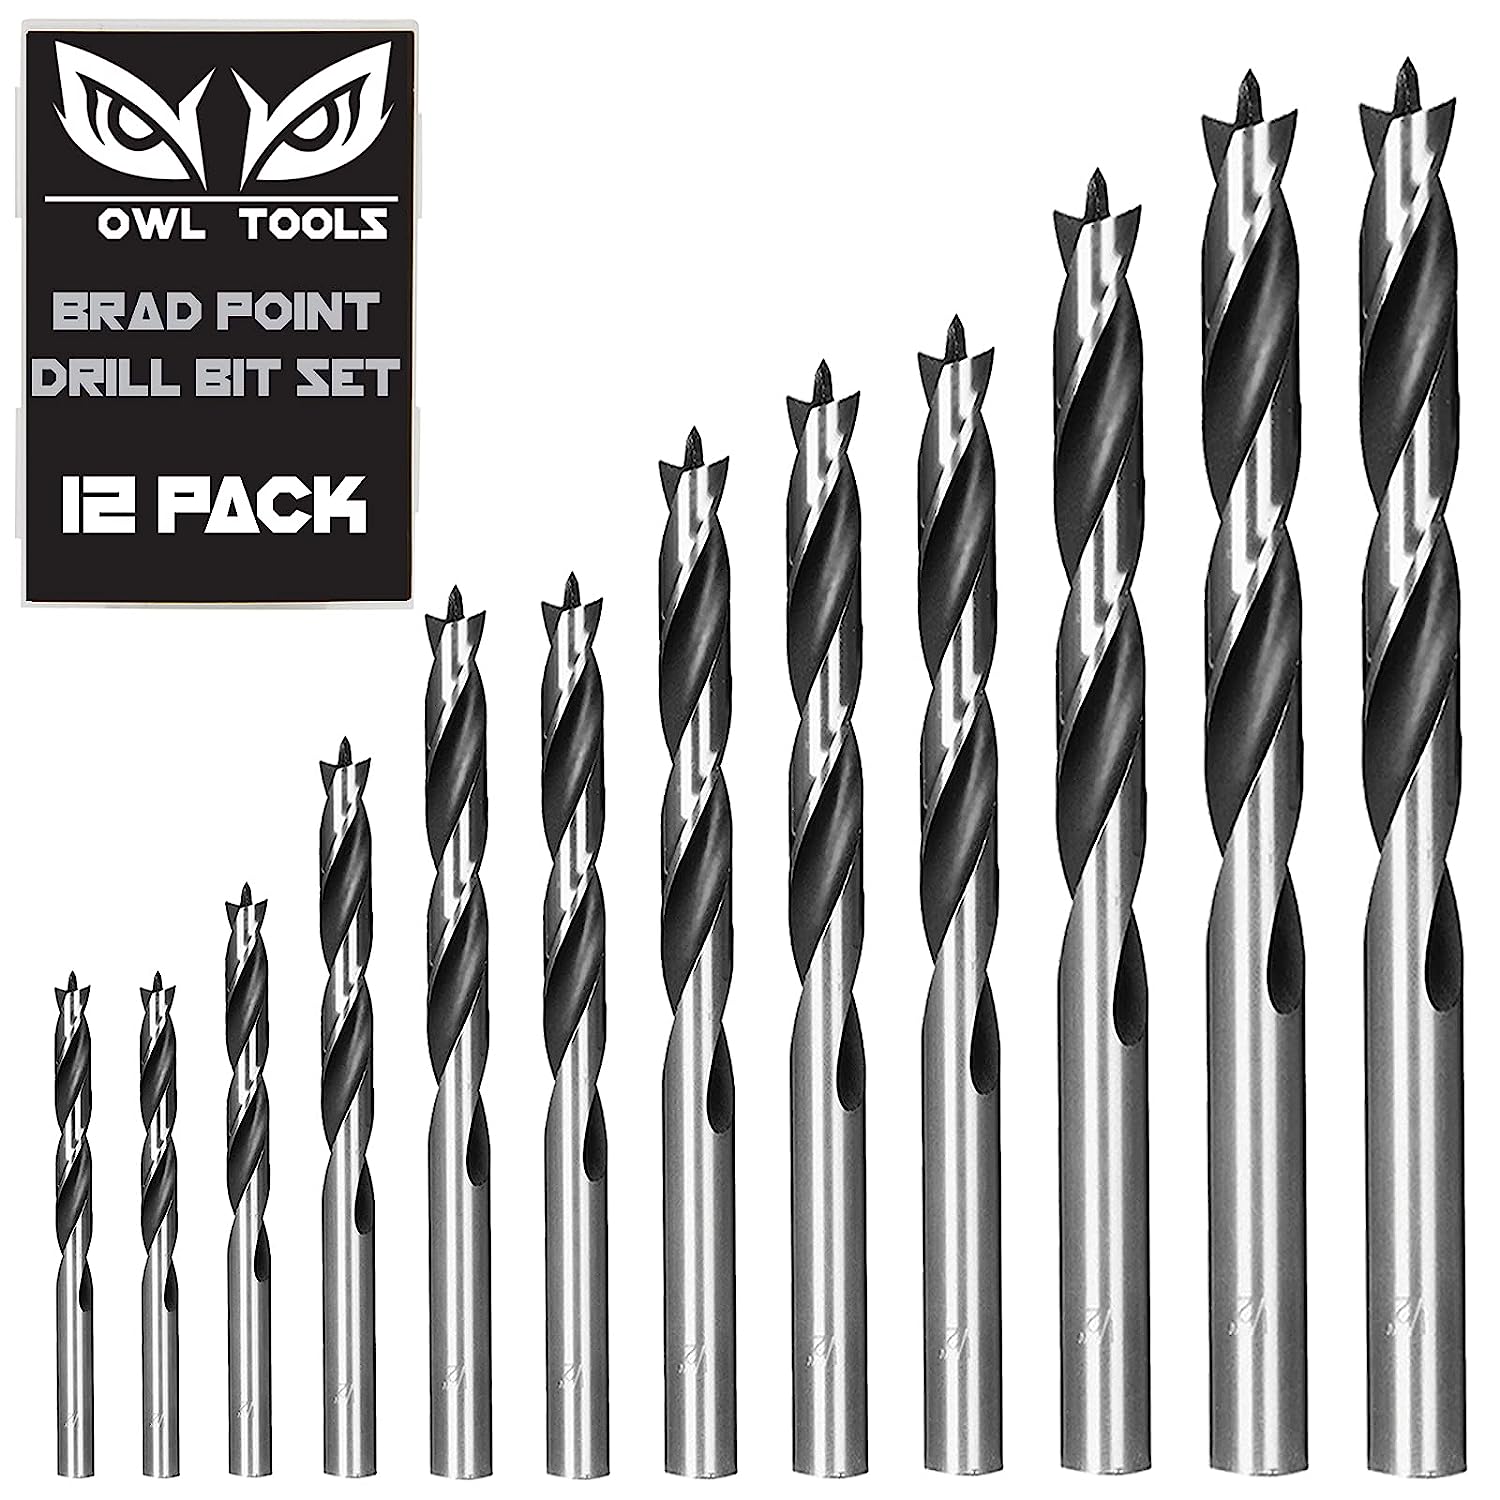 OWL TOOLS Brad Point Wood Drill Bit Set (12 Pack with [...]